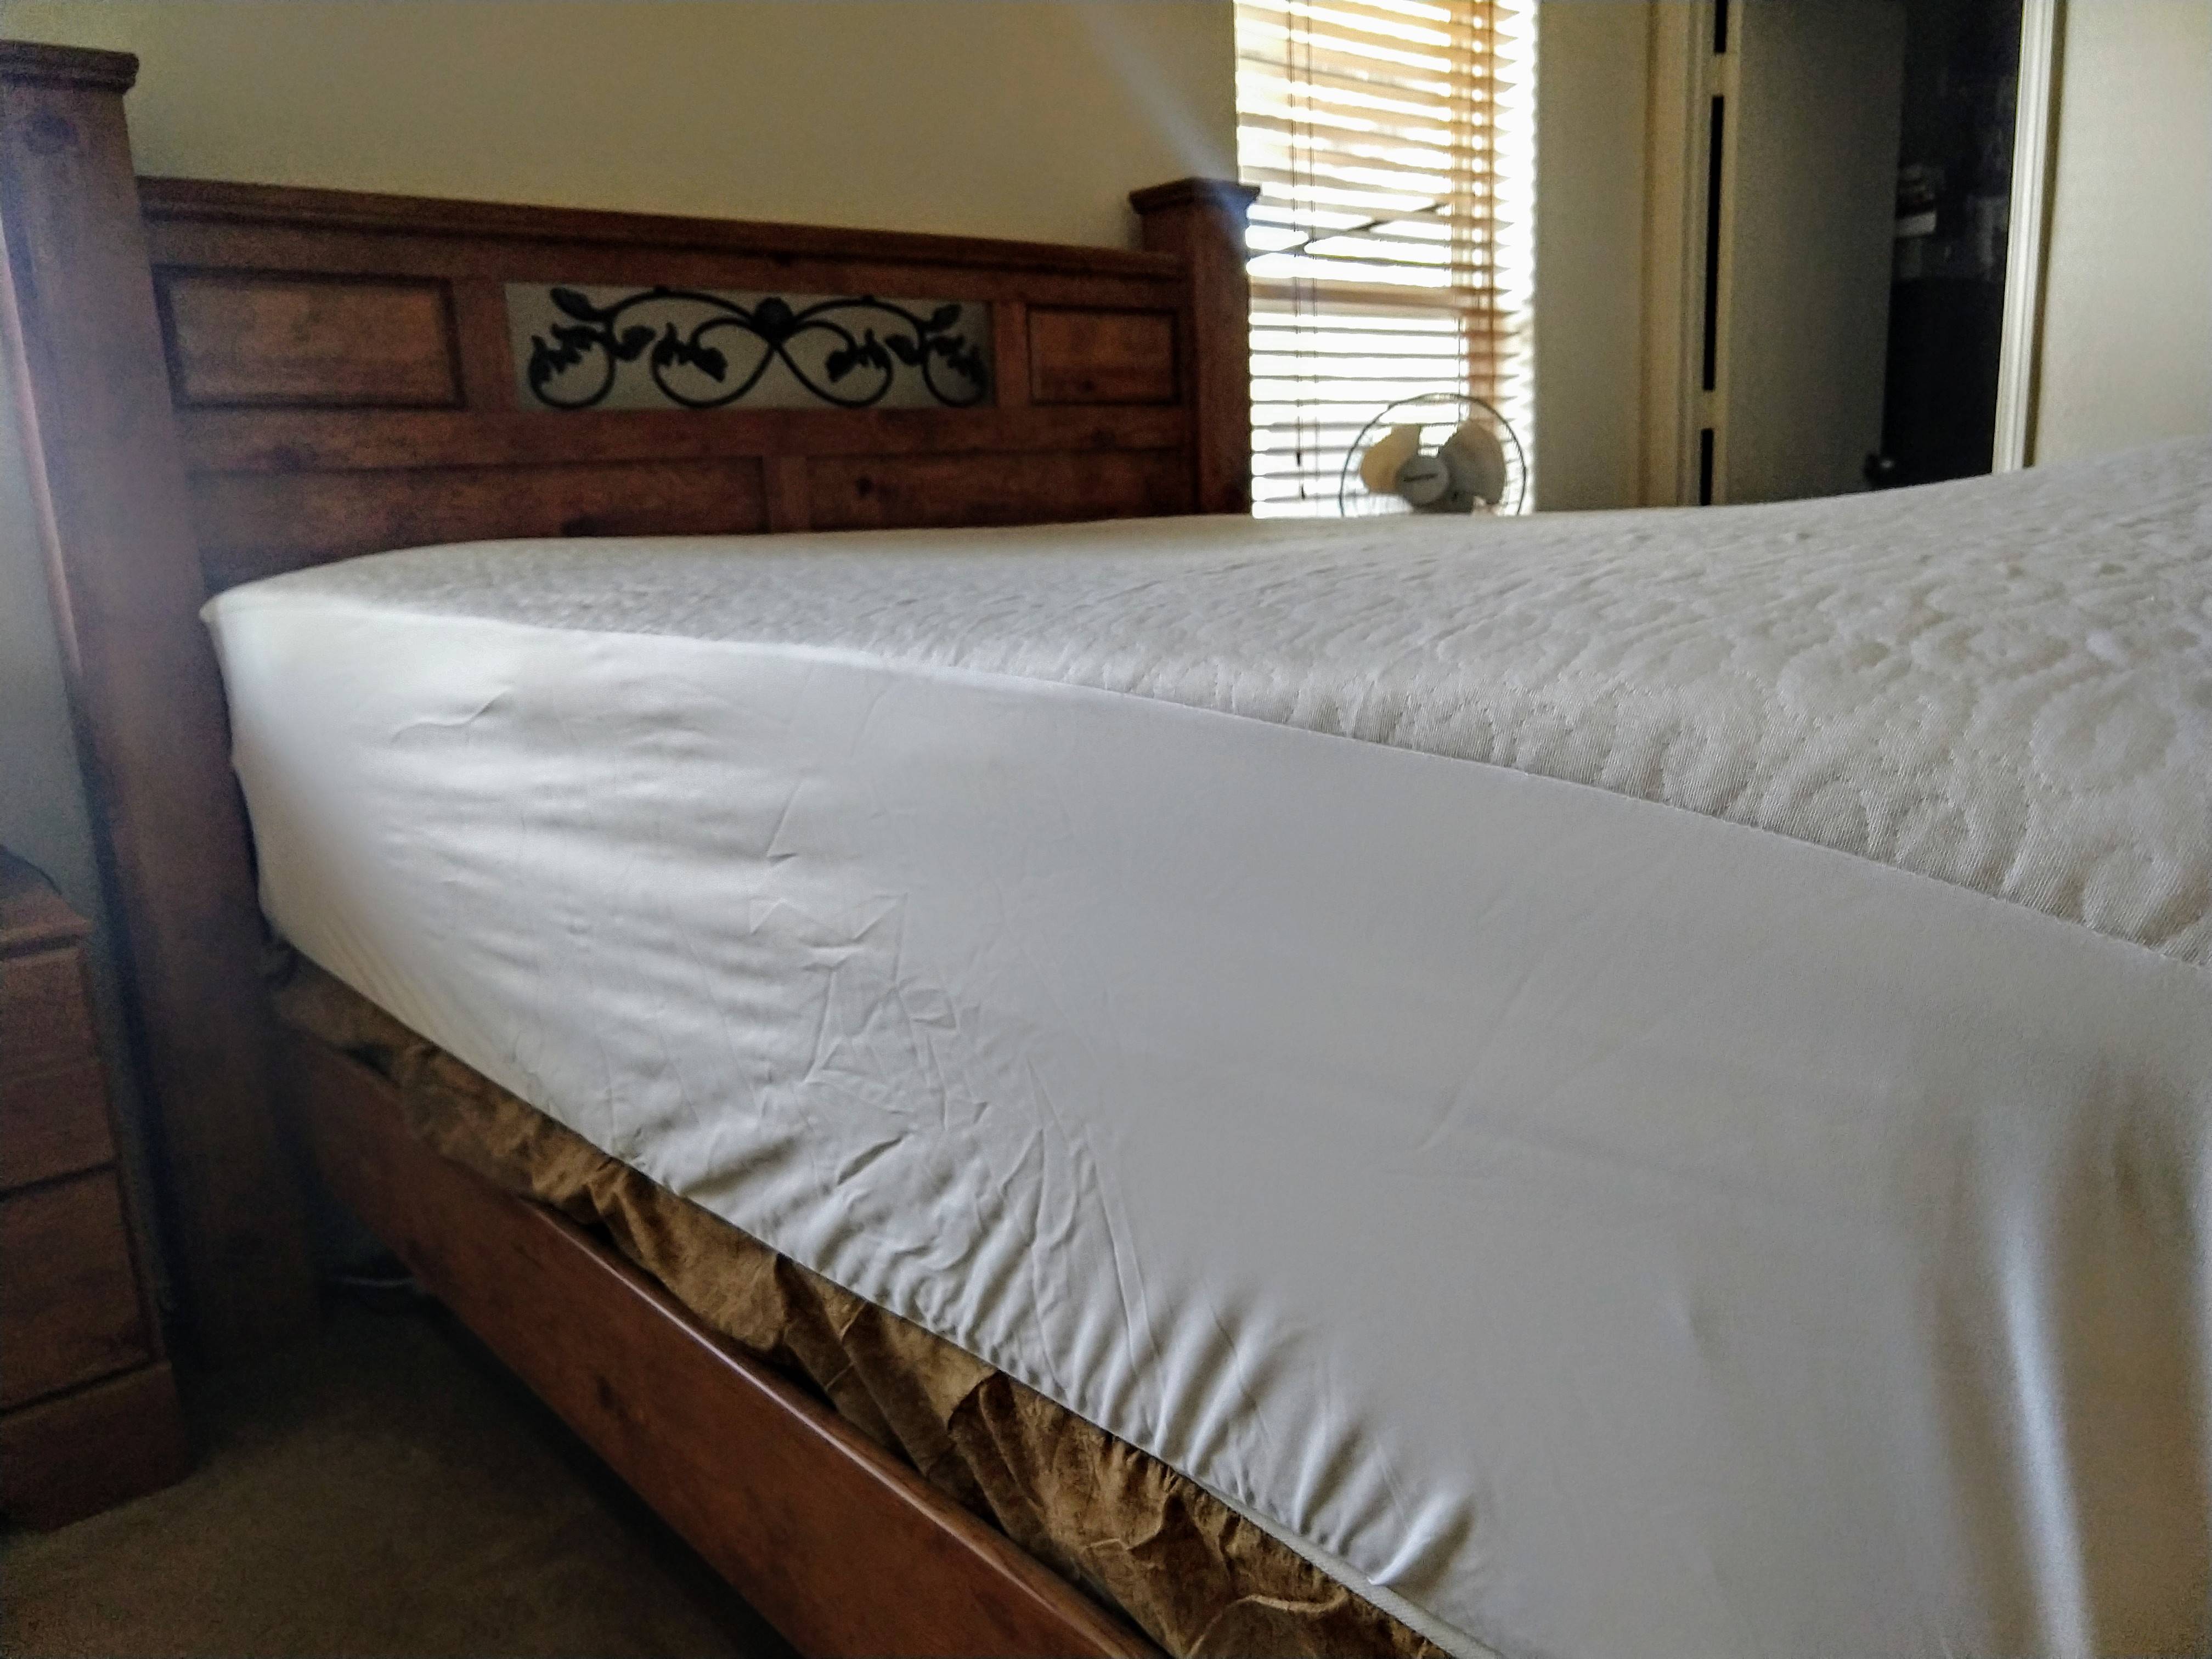 mattress protector for ghostbed